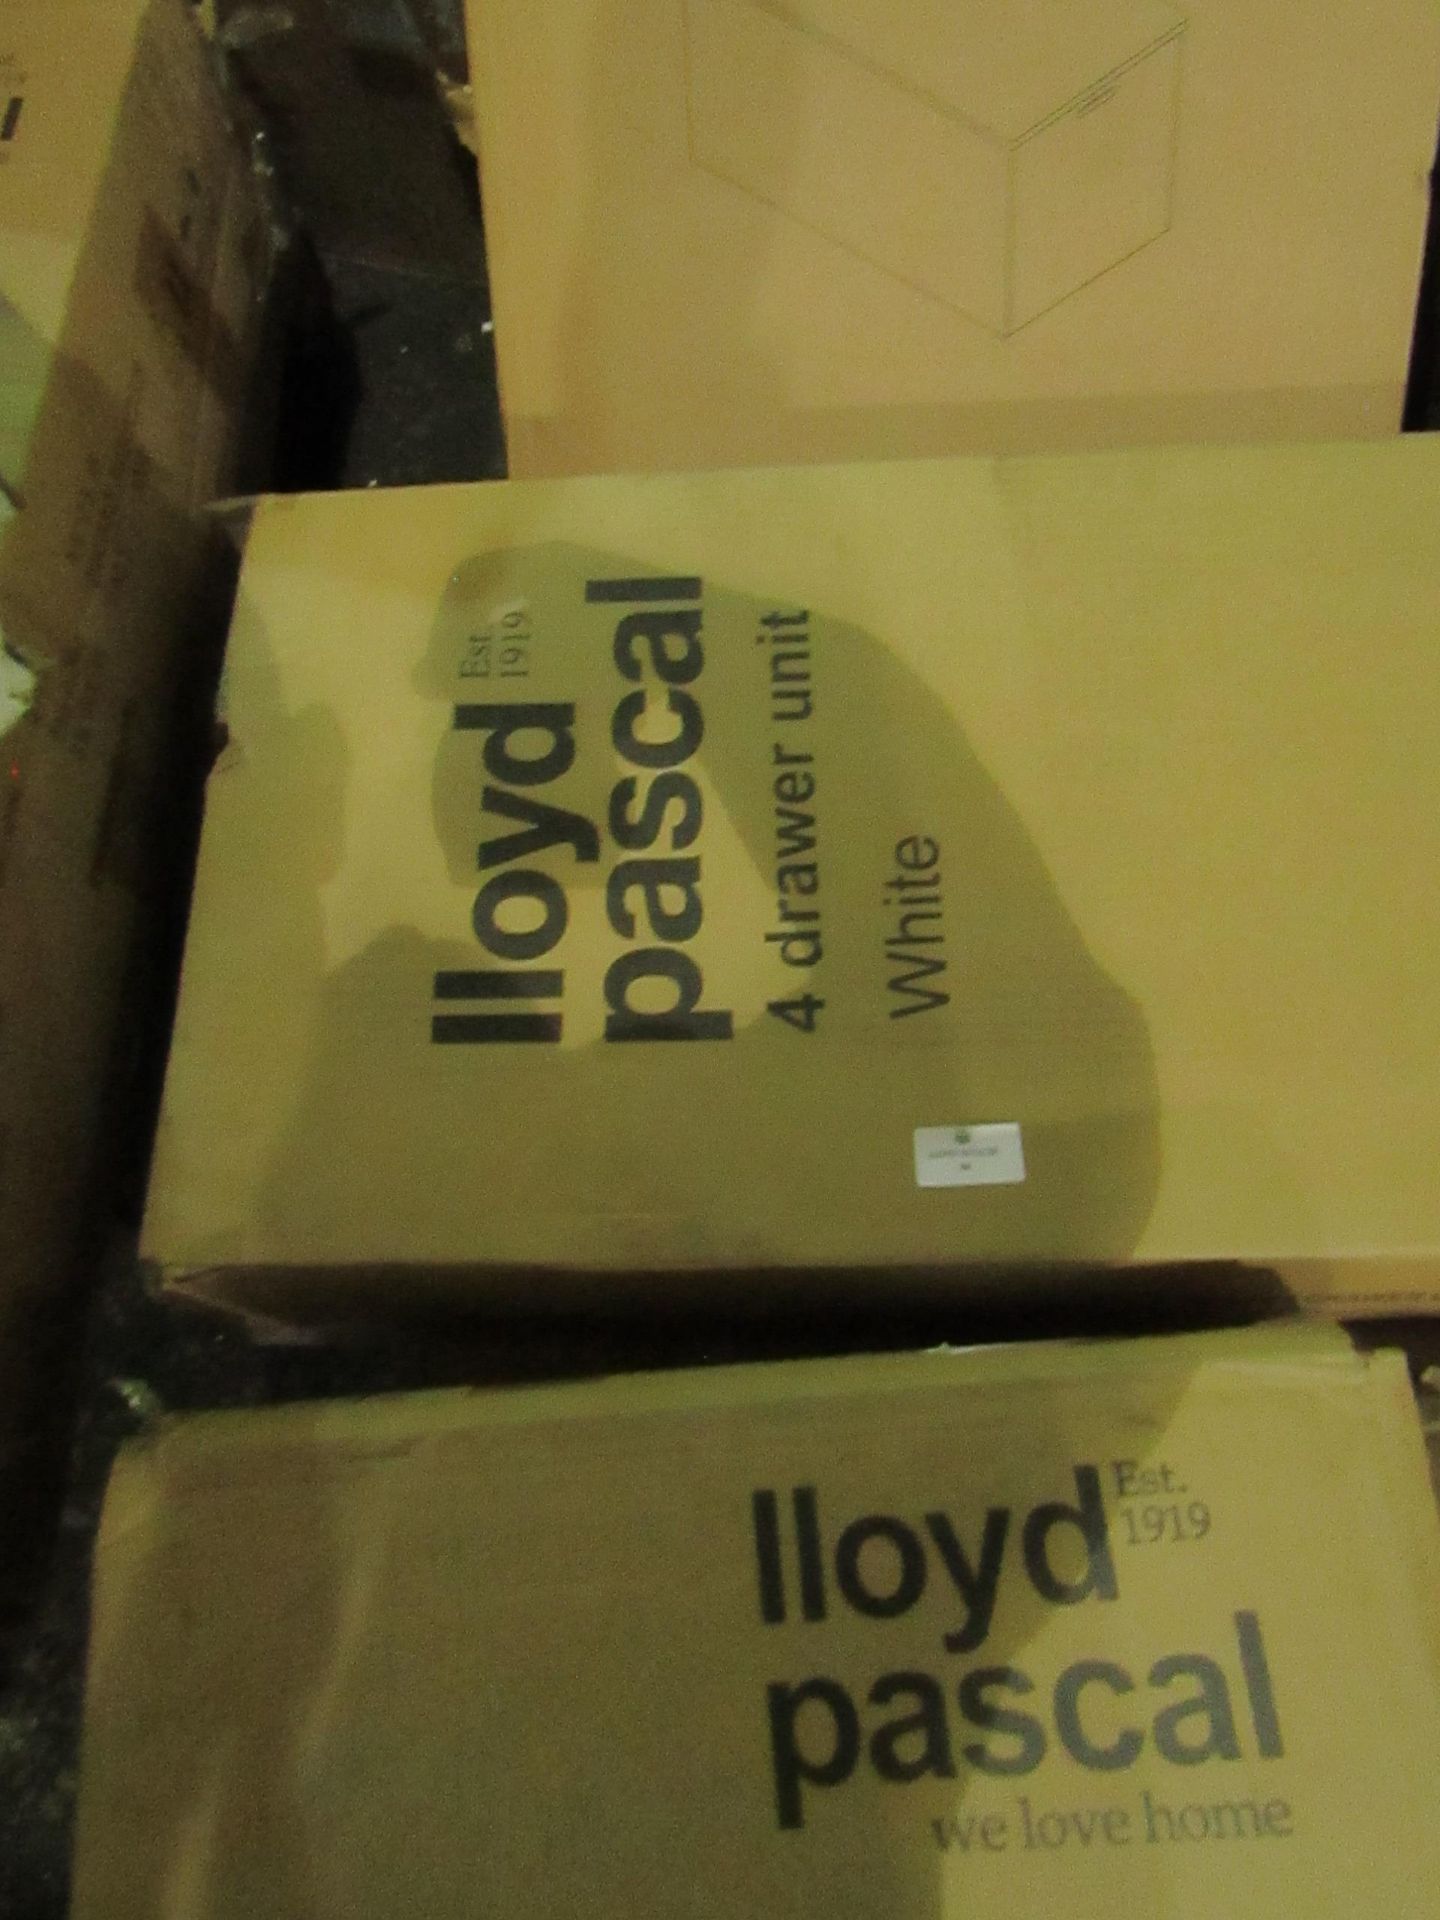 Lloyd Pascal White 4 Drawer unit. RRP £49 boxed unchecked